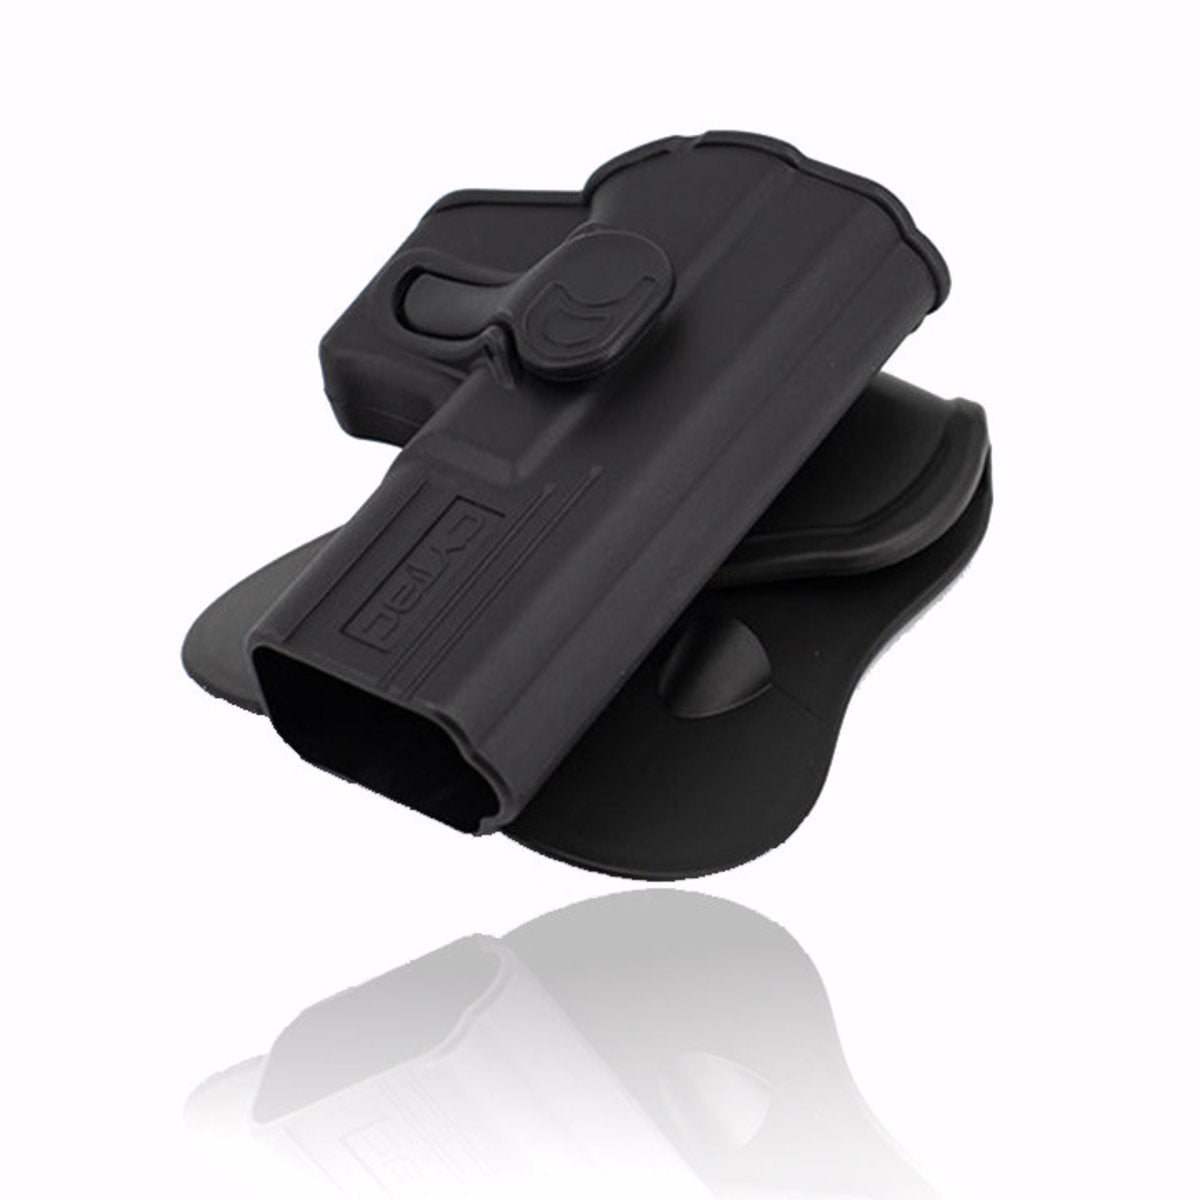 Cytac OWB Holster - Fits GLOCK 19, 23, 32 (Gen 1,2,3,4) - Eminent Paintball And Airsoft